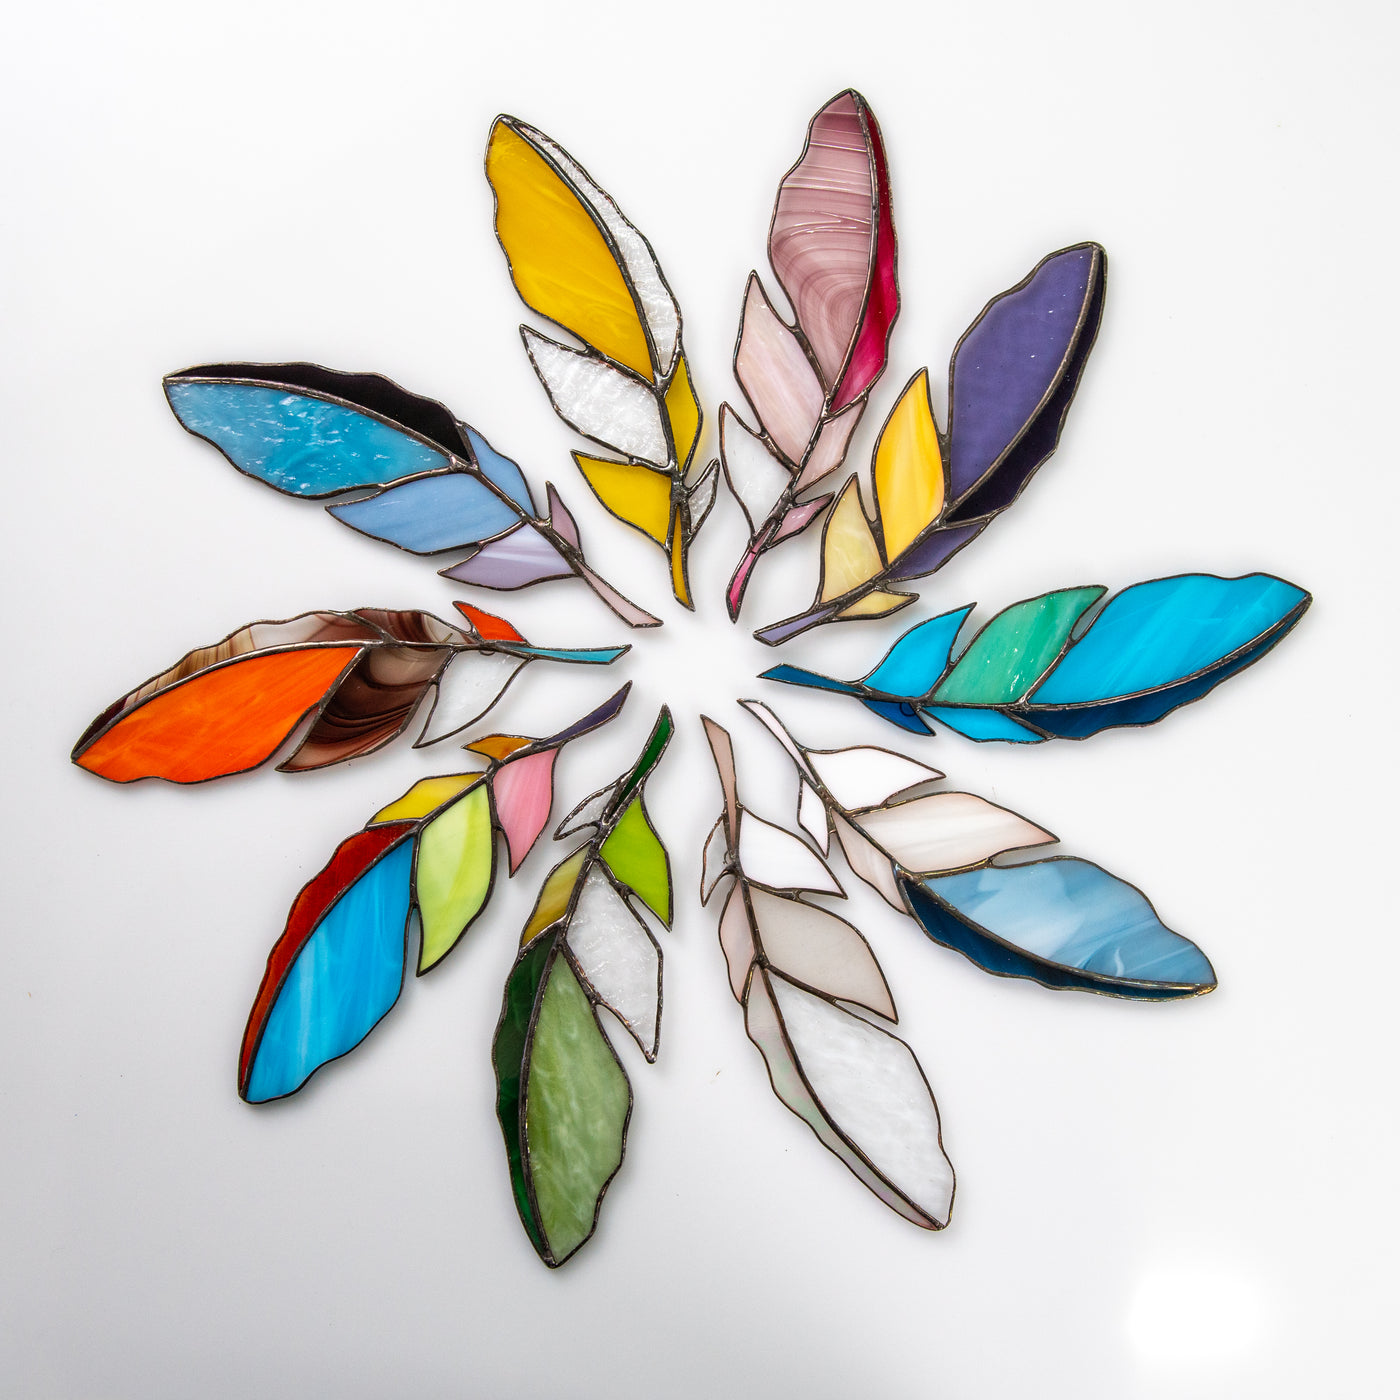 The collection of stained glass feathers suncatchers